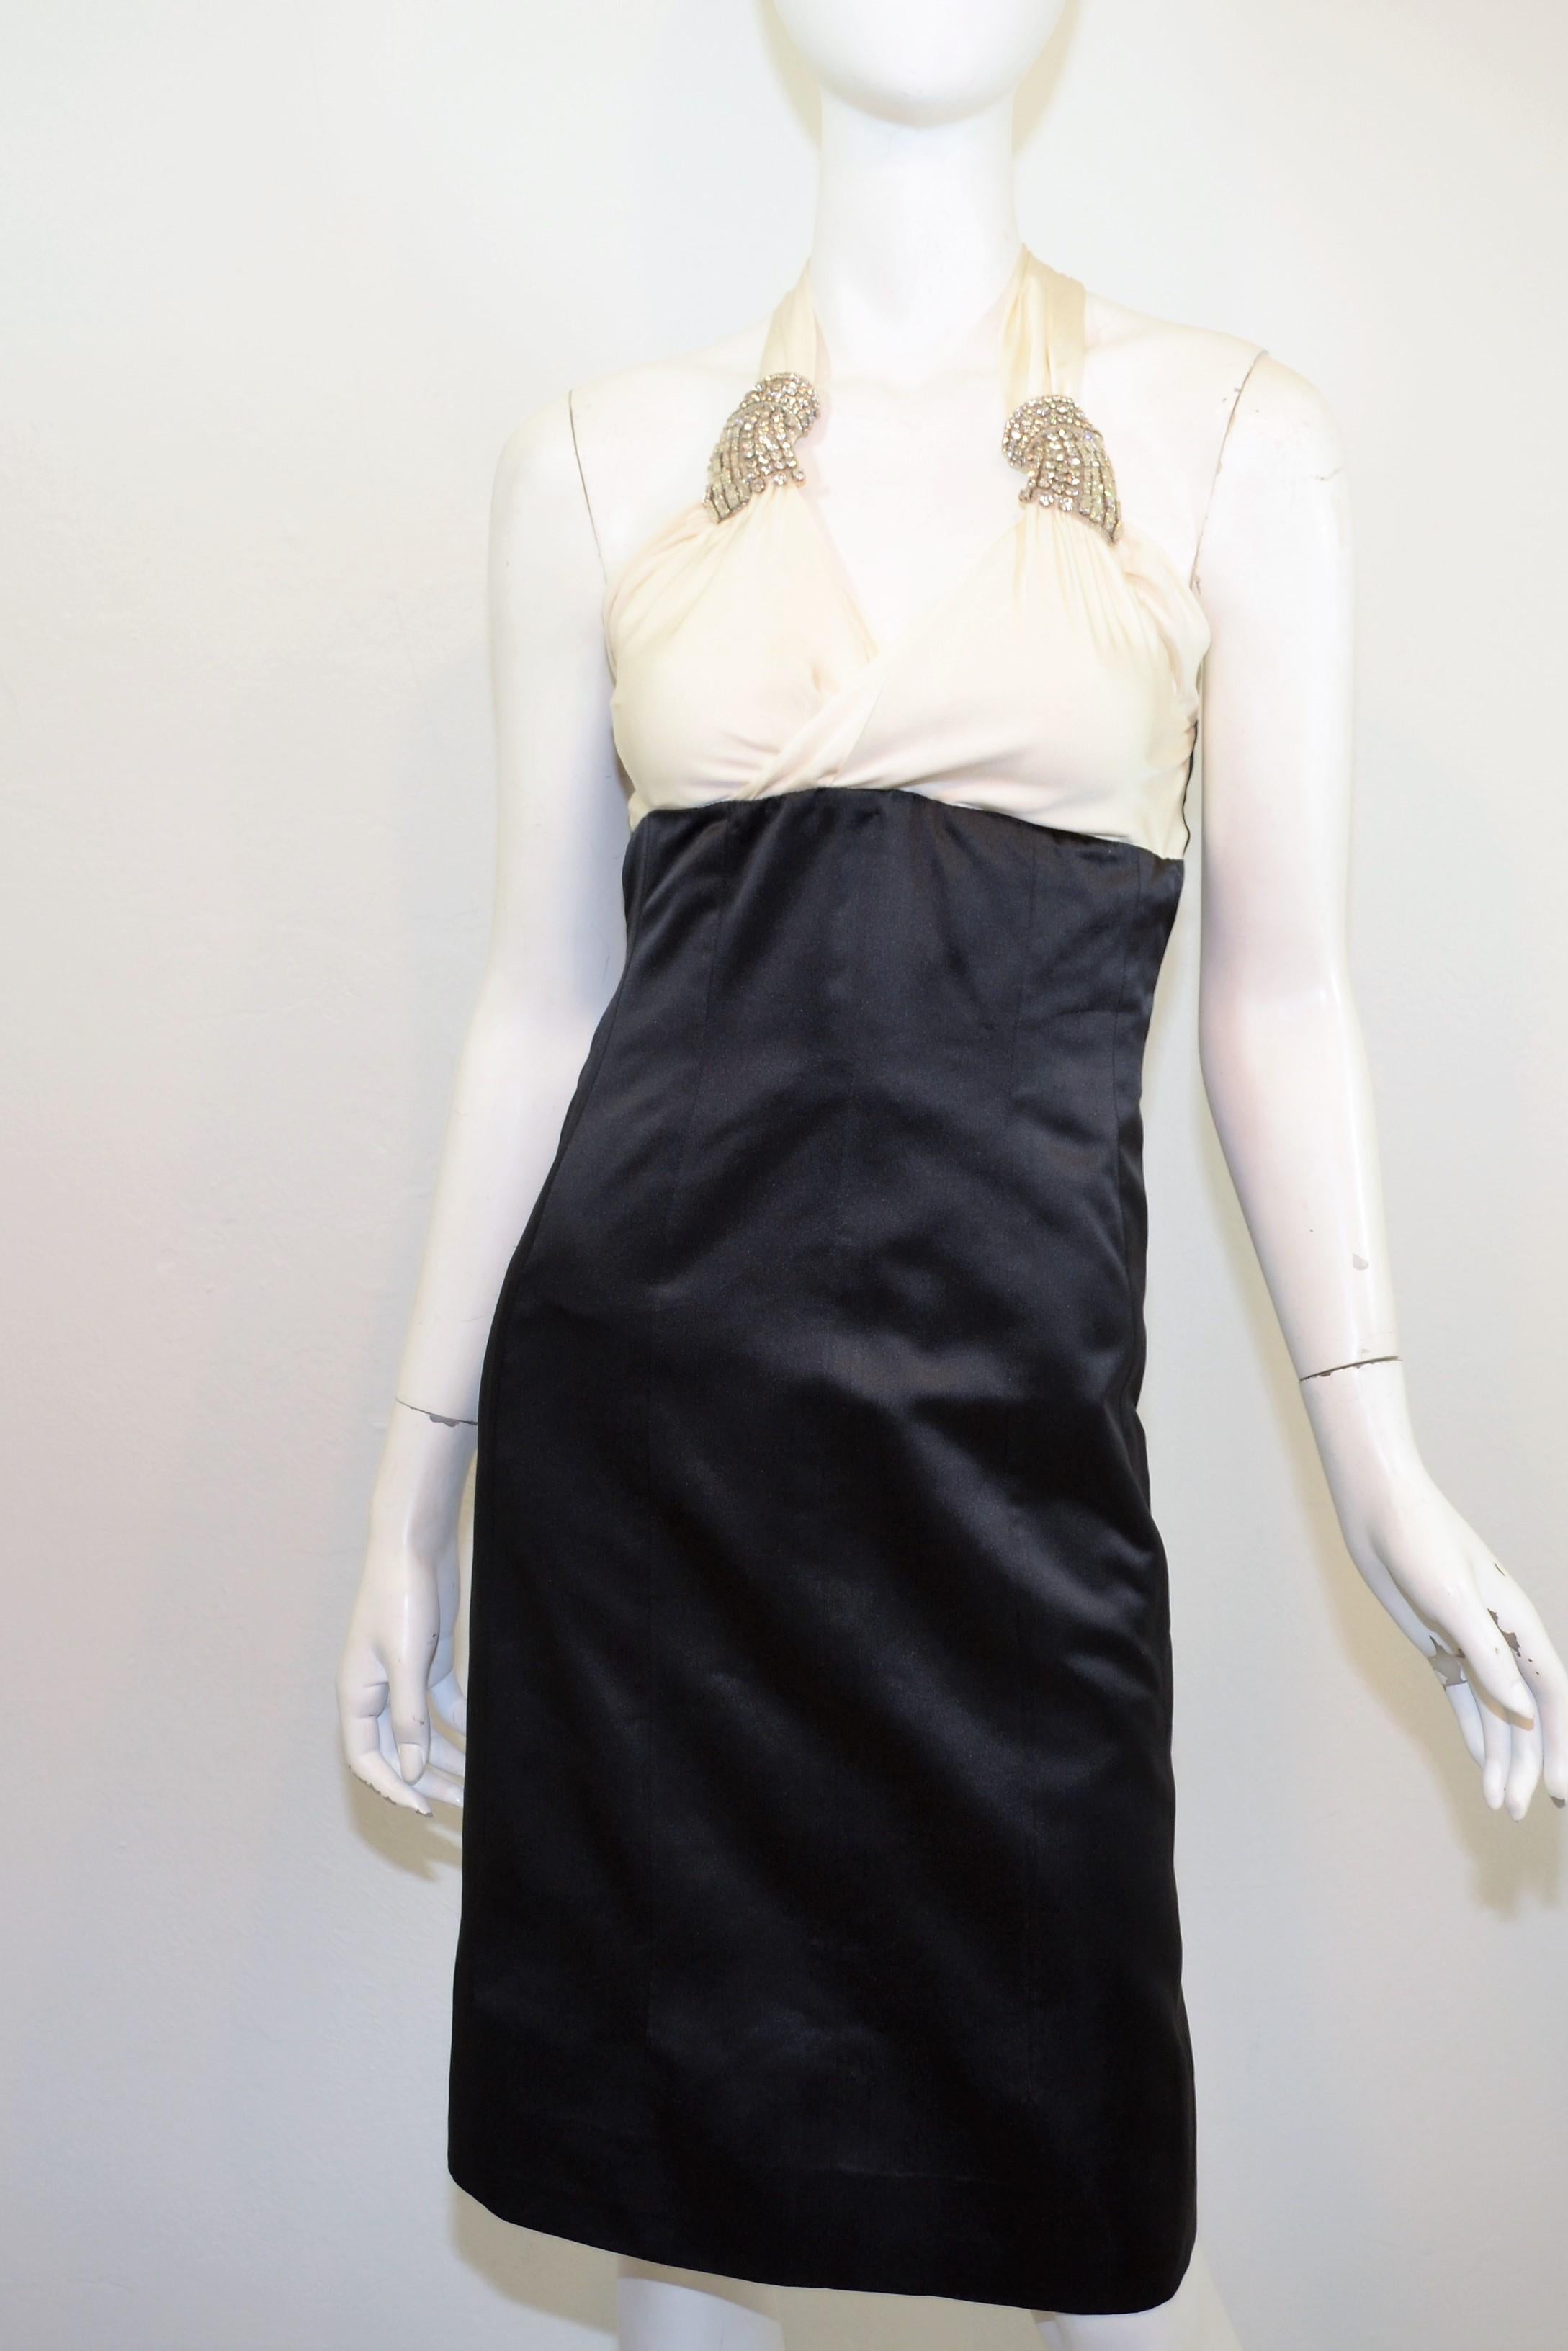 Chanel dress from 2006 A collection featured in a ivory and black satin with rhinestone brooches at the shoulder straps. Dress has a back zipper closure with a CC dangle zipper pull, and a corseted lining. Composed with 100% silk, size 38, made in